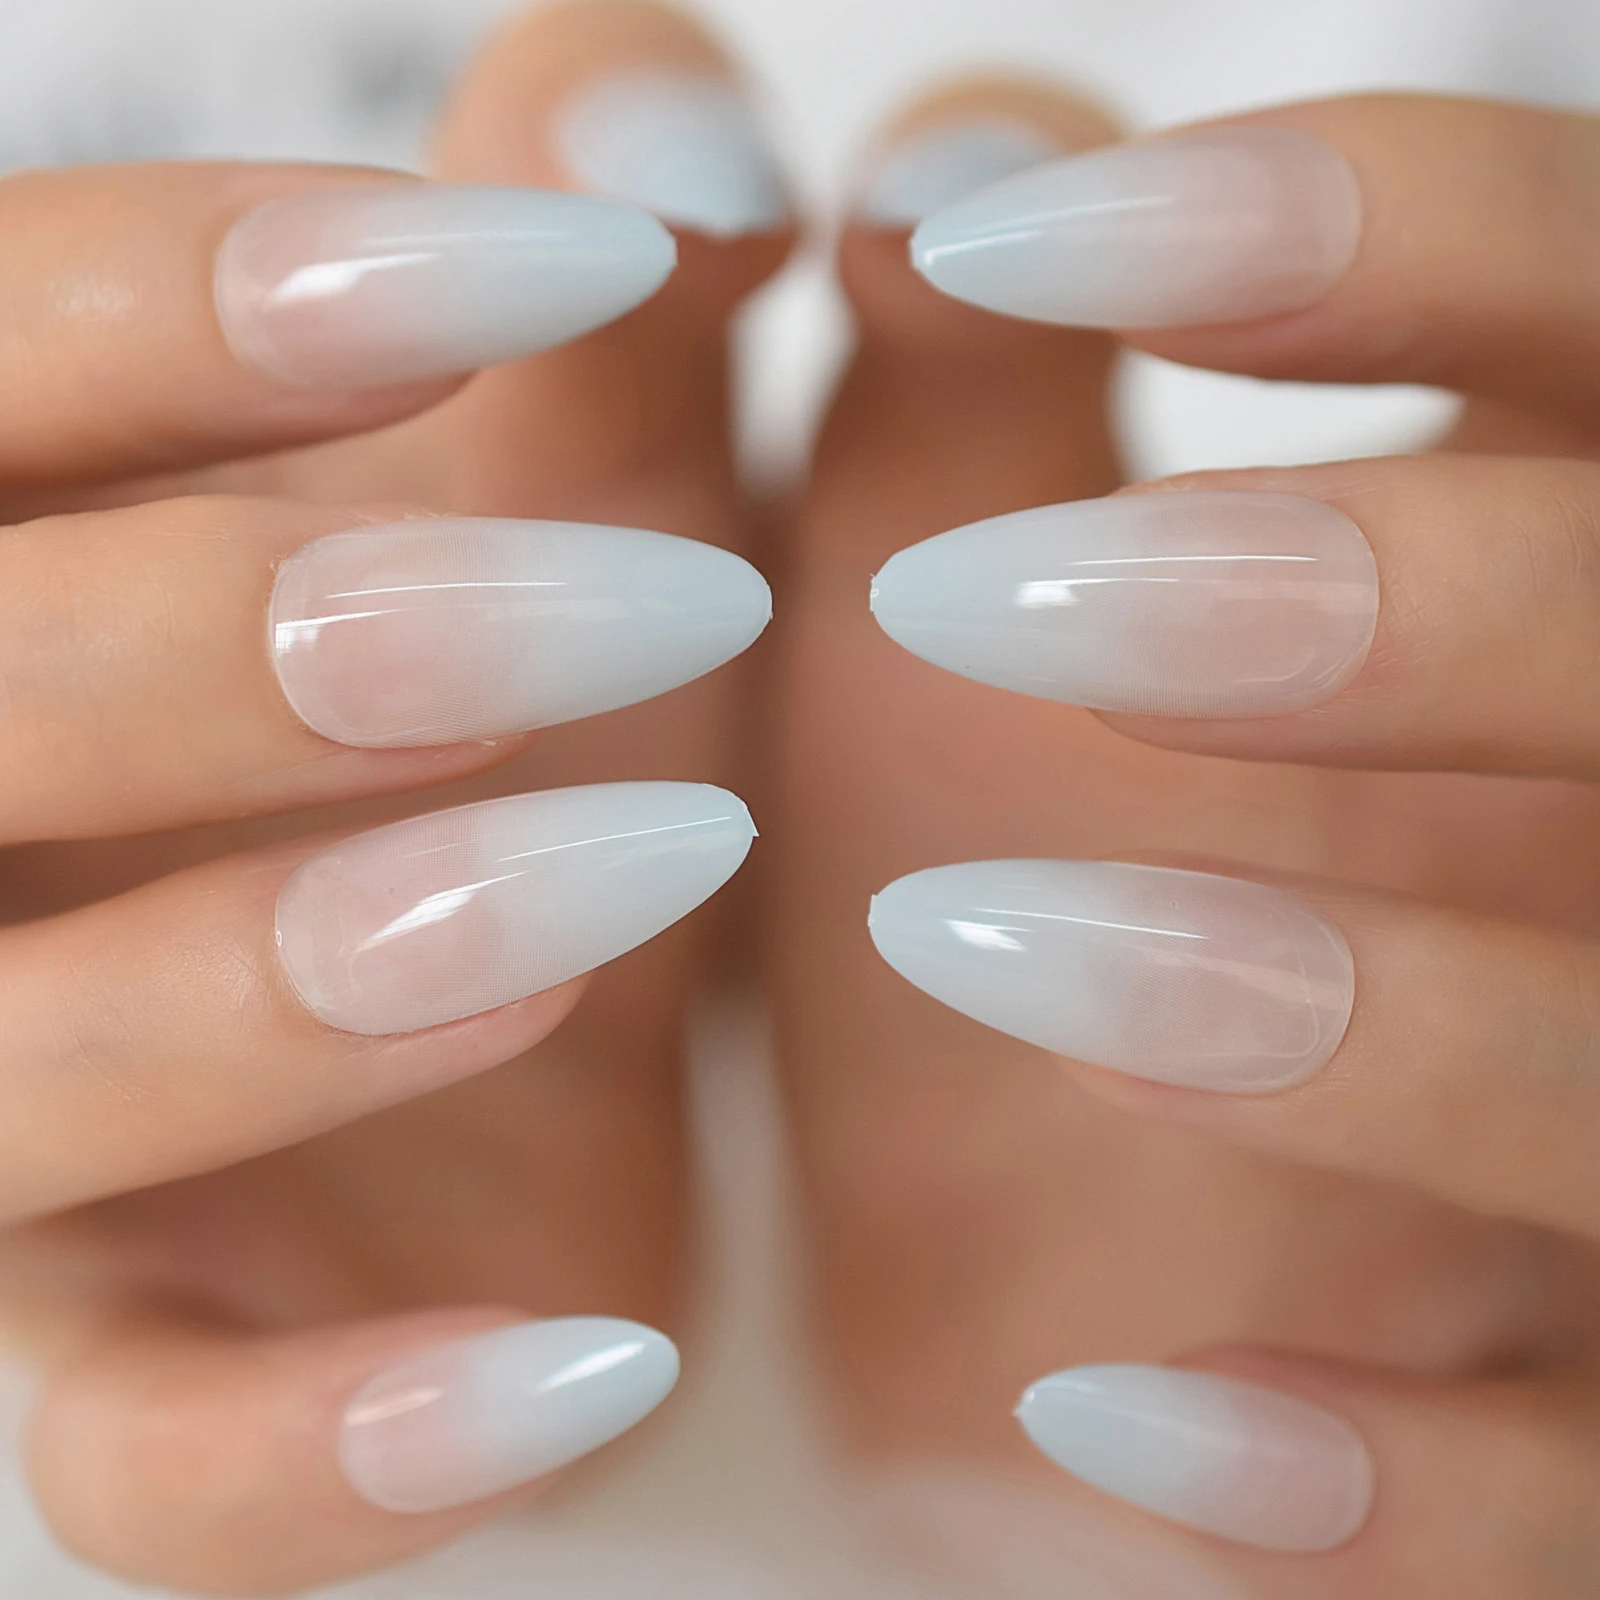 Soft Blue Nude Ombre Fake Nails Almond Shaped Artificial Nails Tips With Glue  Tape Press On Nail False Nails Set Nail Art|False Nails| - AliExpress